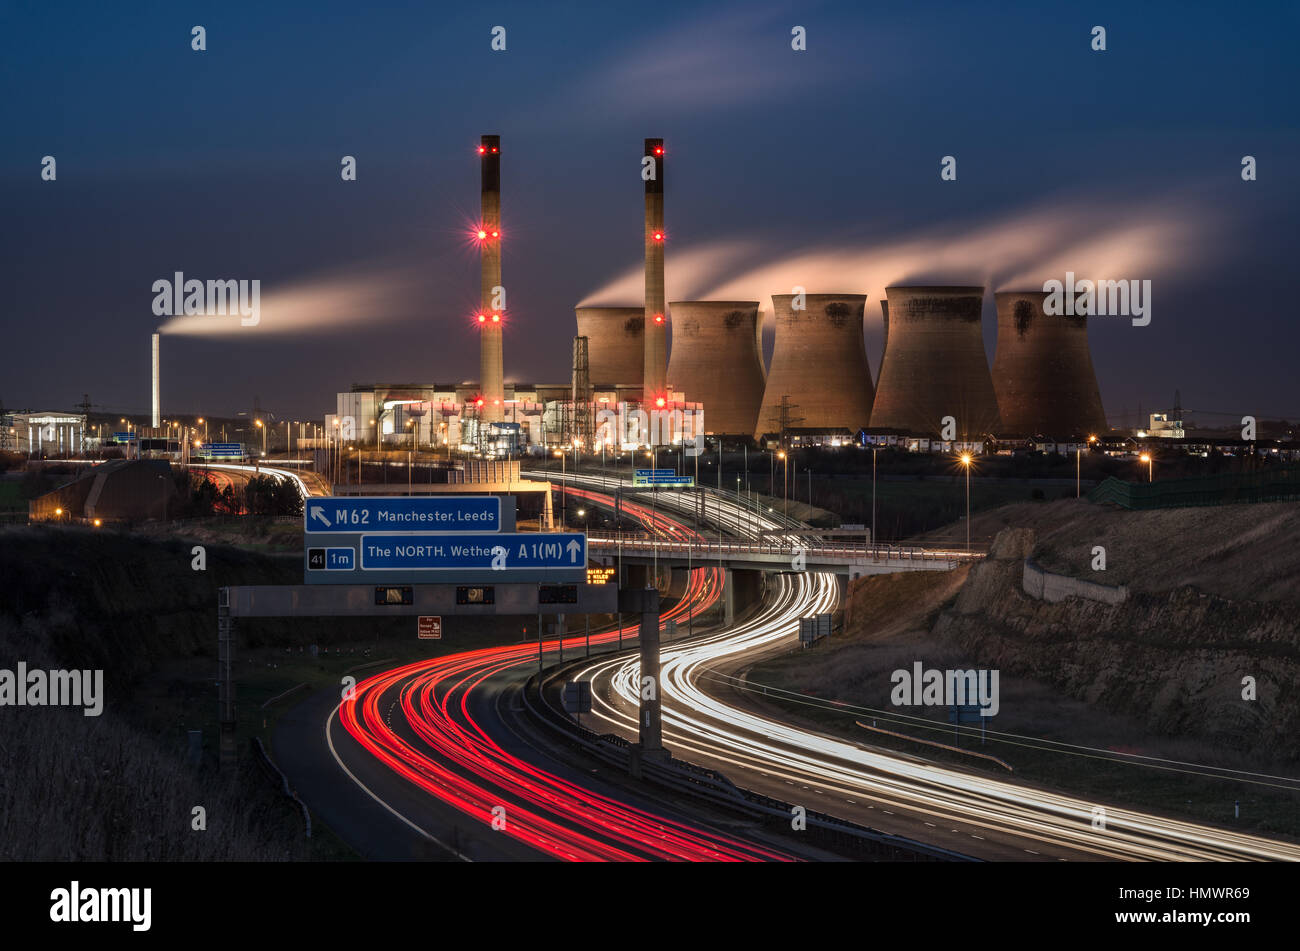 Ferrybridge Power Station, Knottingley Yorks UK. Light trails from the A1(M) Motorway pass by the backdrop of steaming cooling towers. Stock Photo